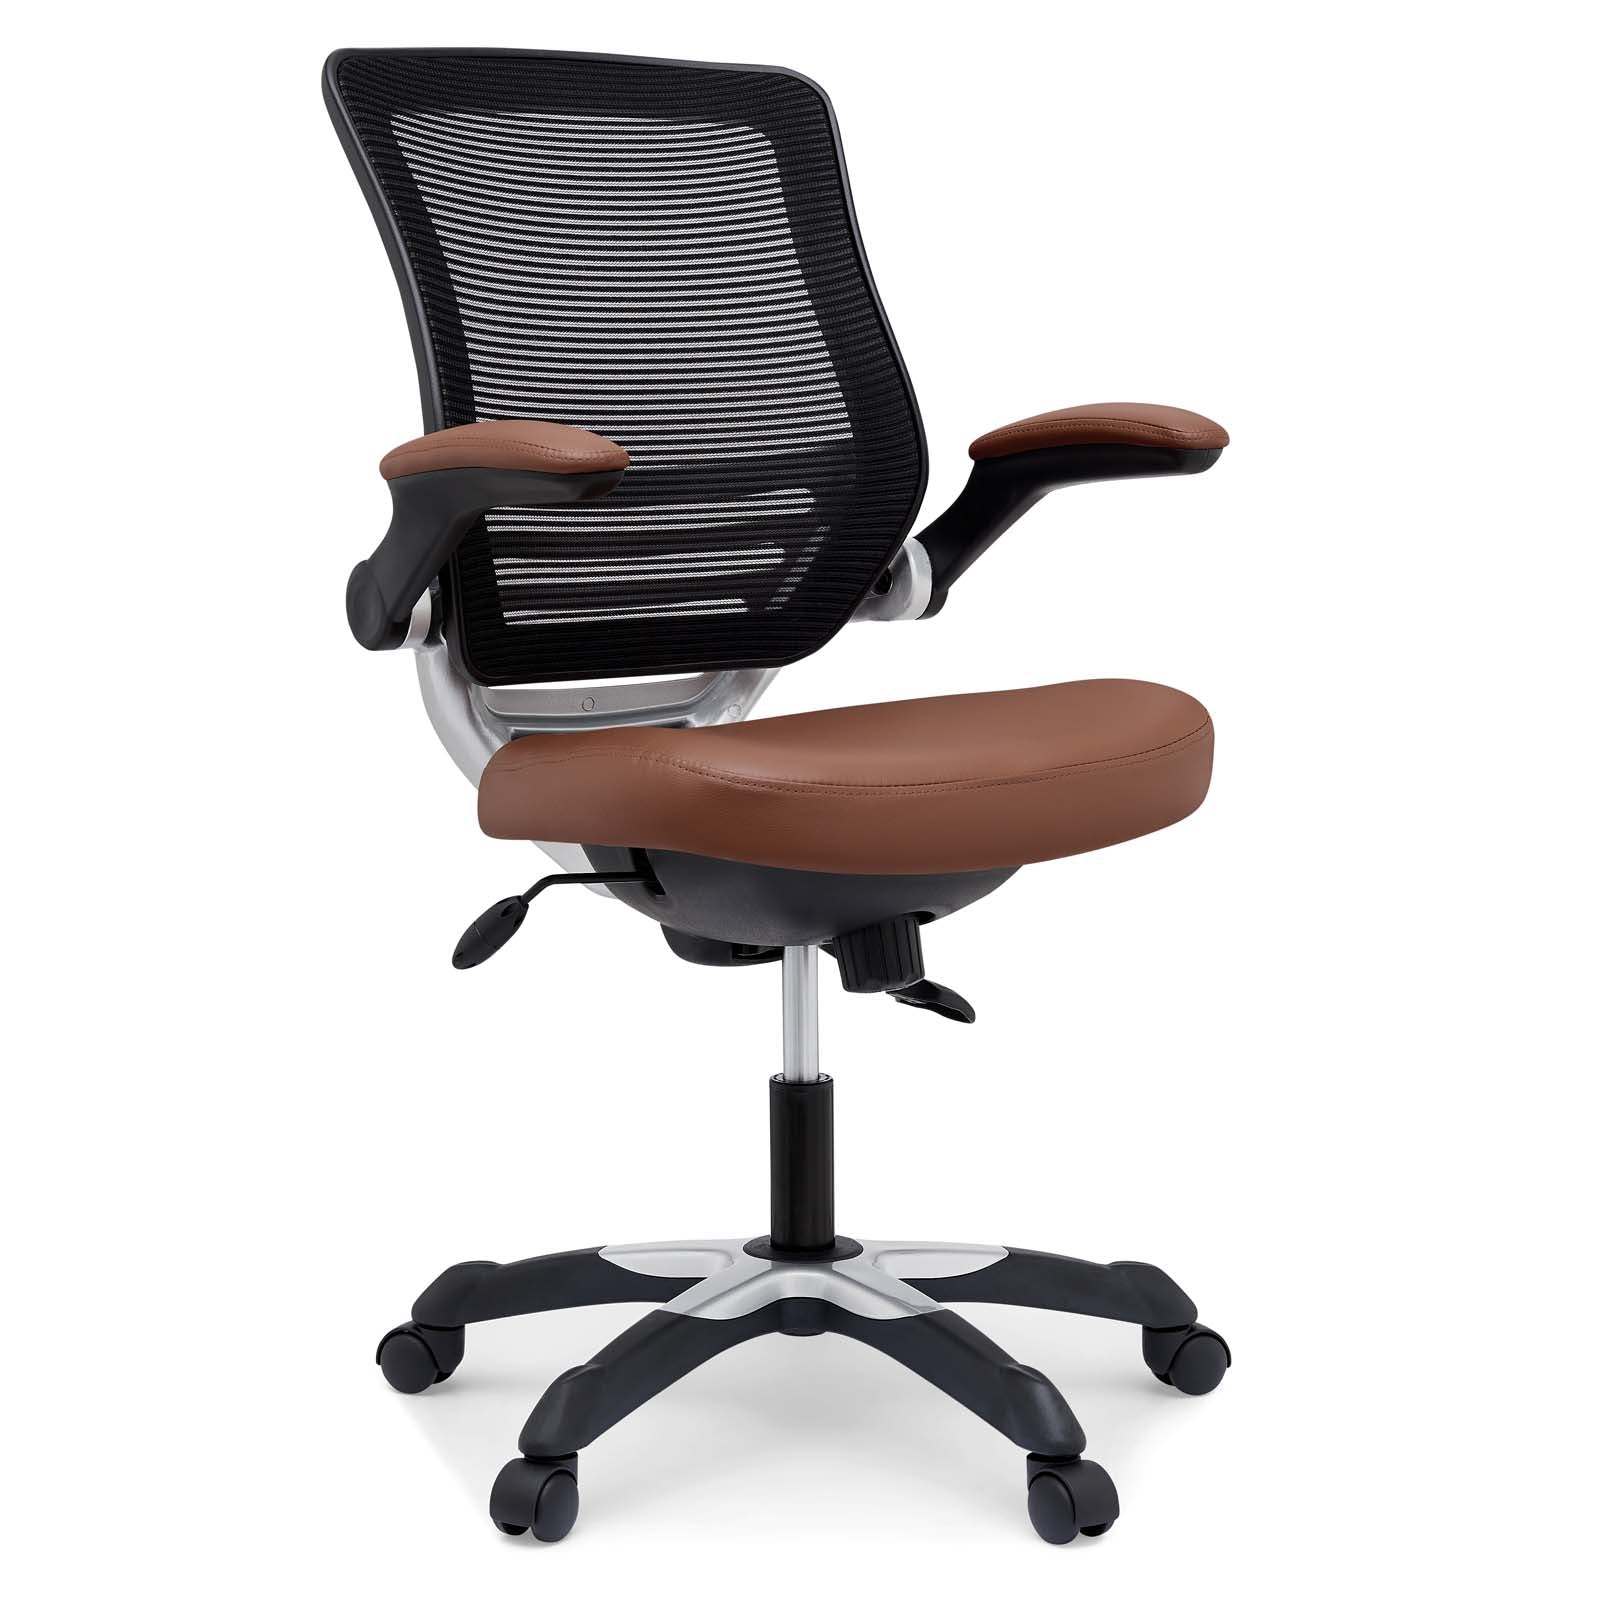 Shop Red Edge Vinyl Office Chair at BUILDMyplace